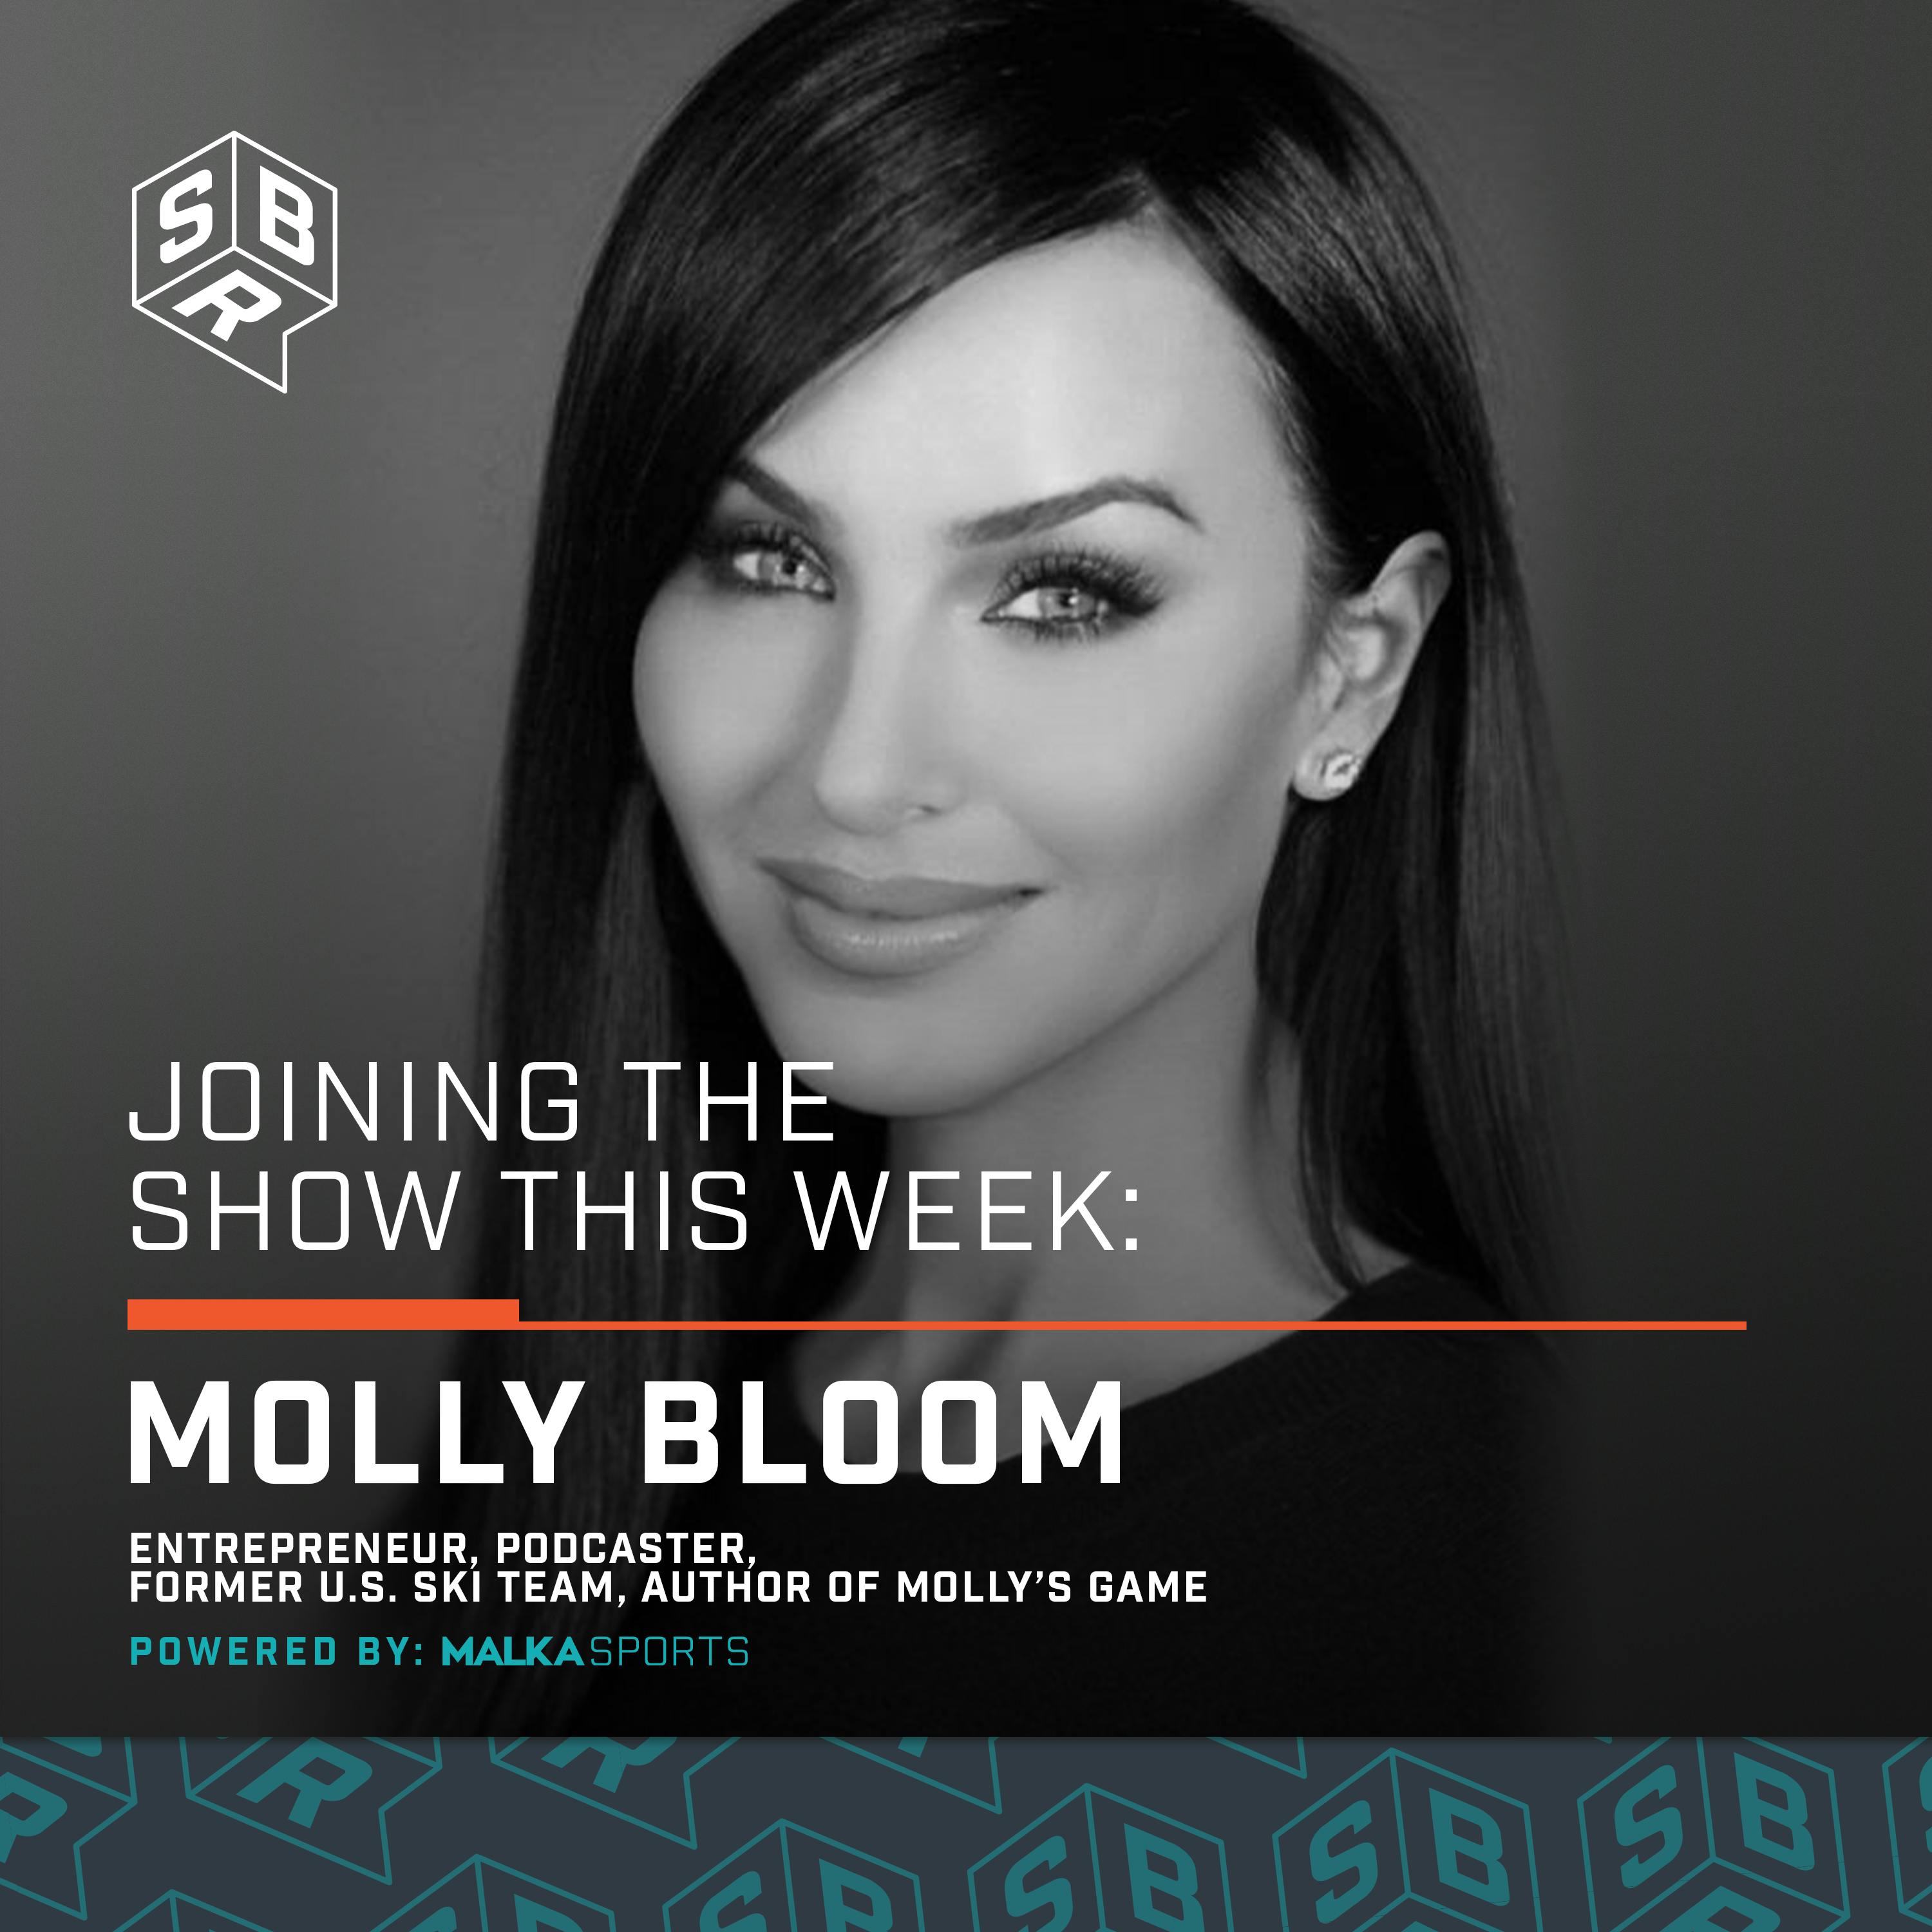 Molly Bloom (@ImMollyBloom) - Author, Podcaster, Entrepreneur - Subject of the movie 